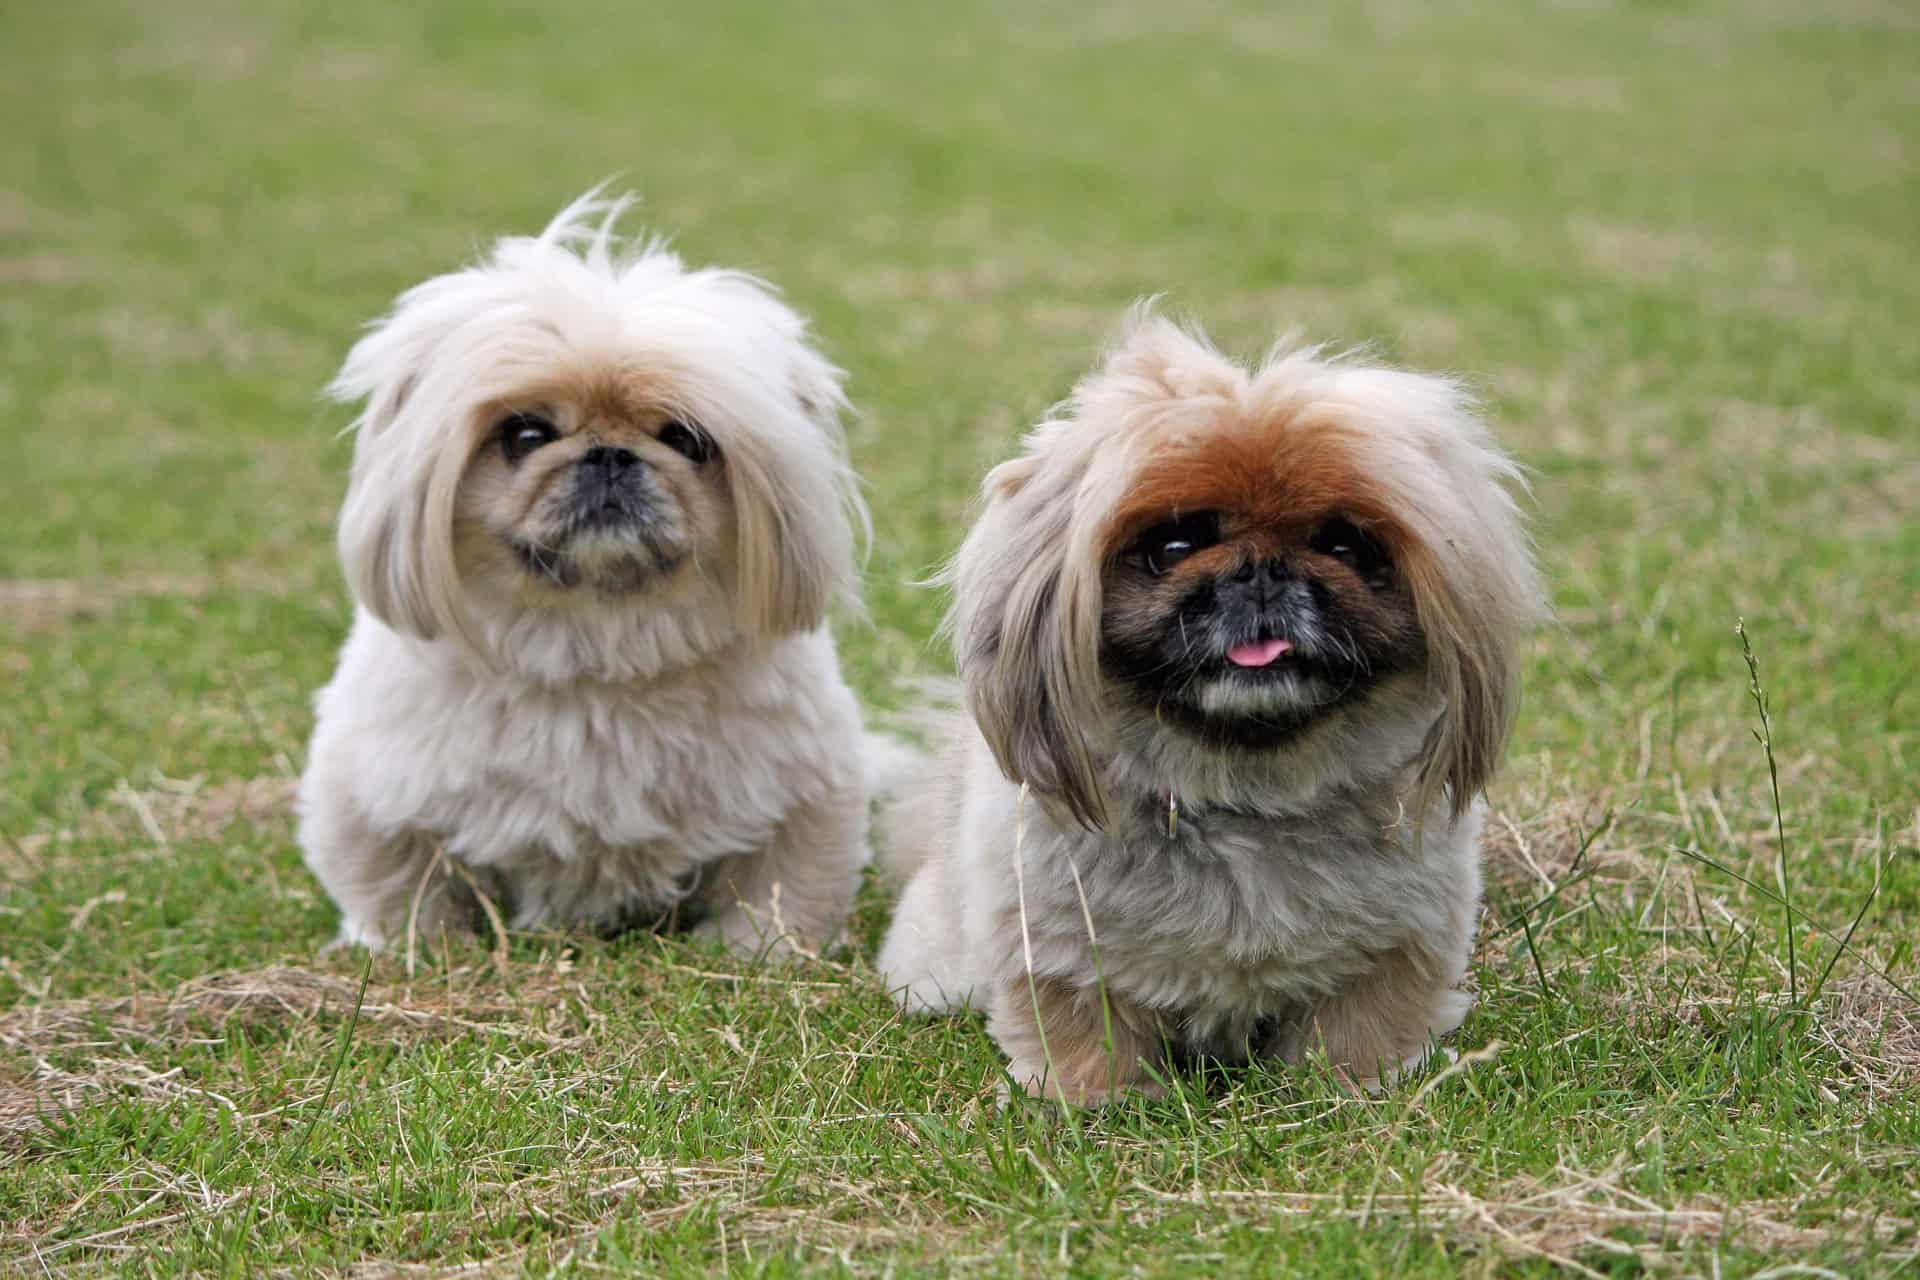 2Pekingese Standing on the Grass - Looking Hungry